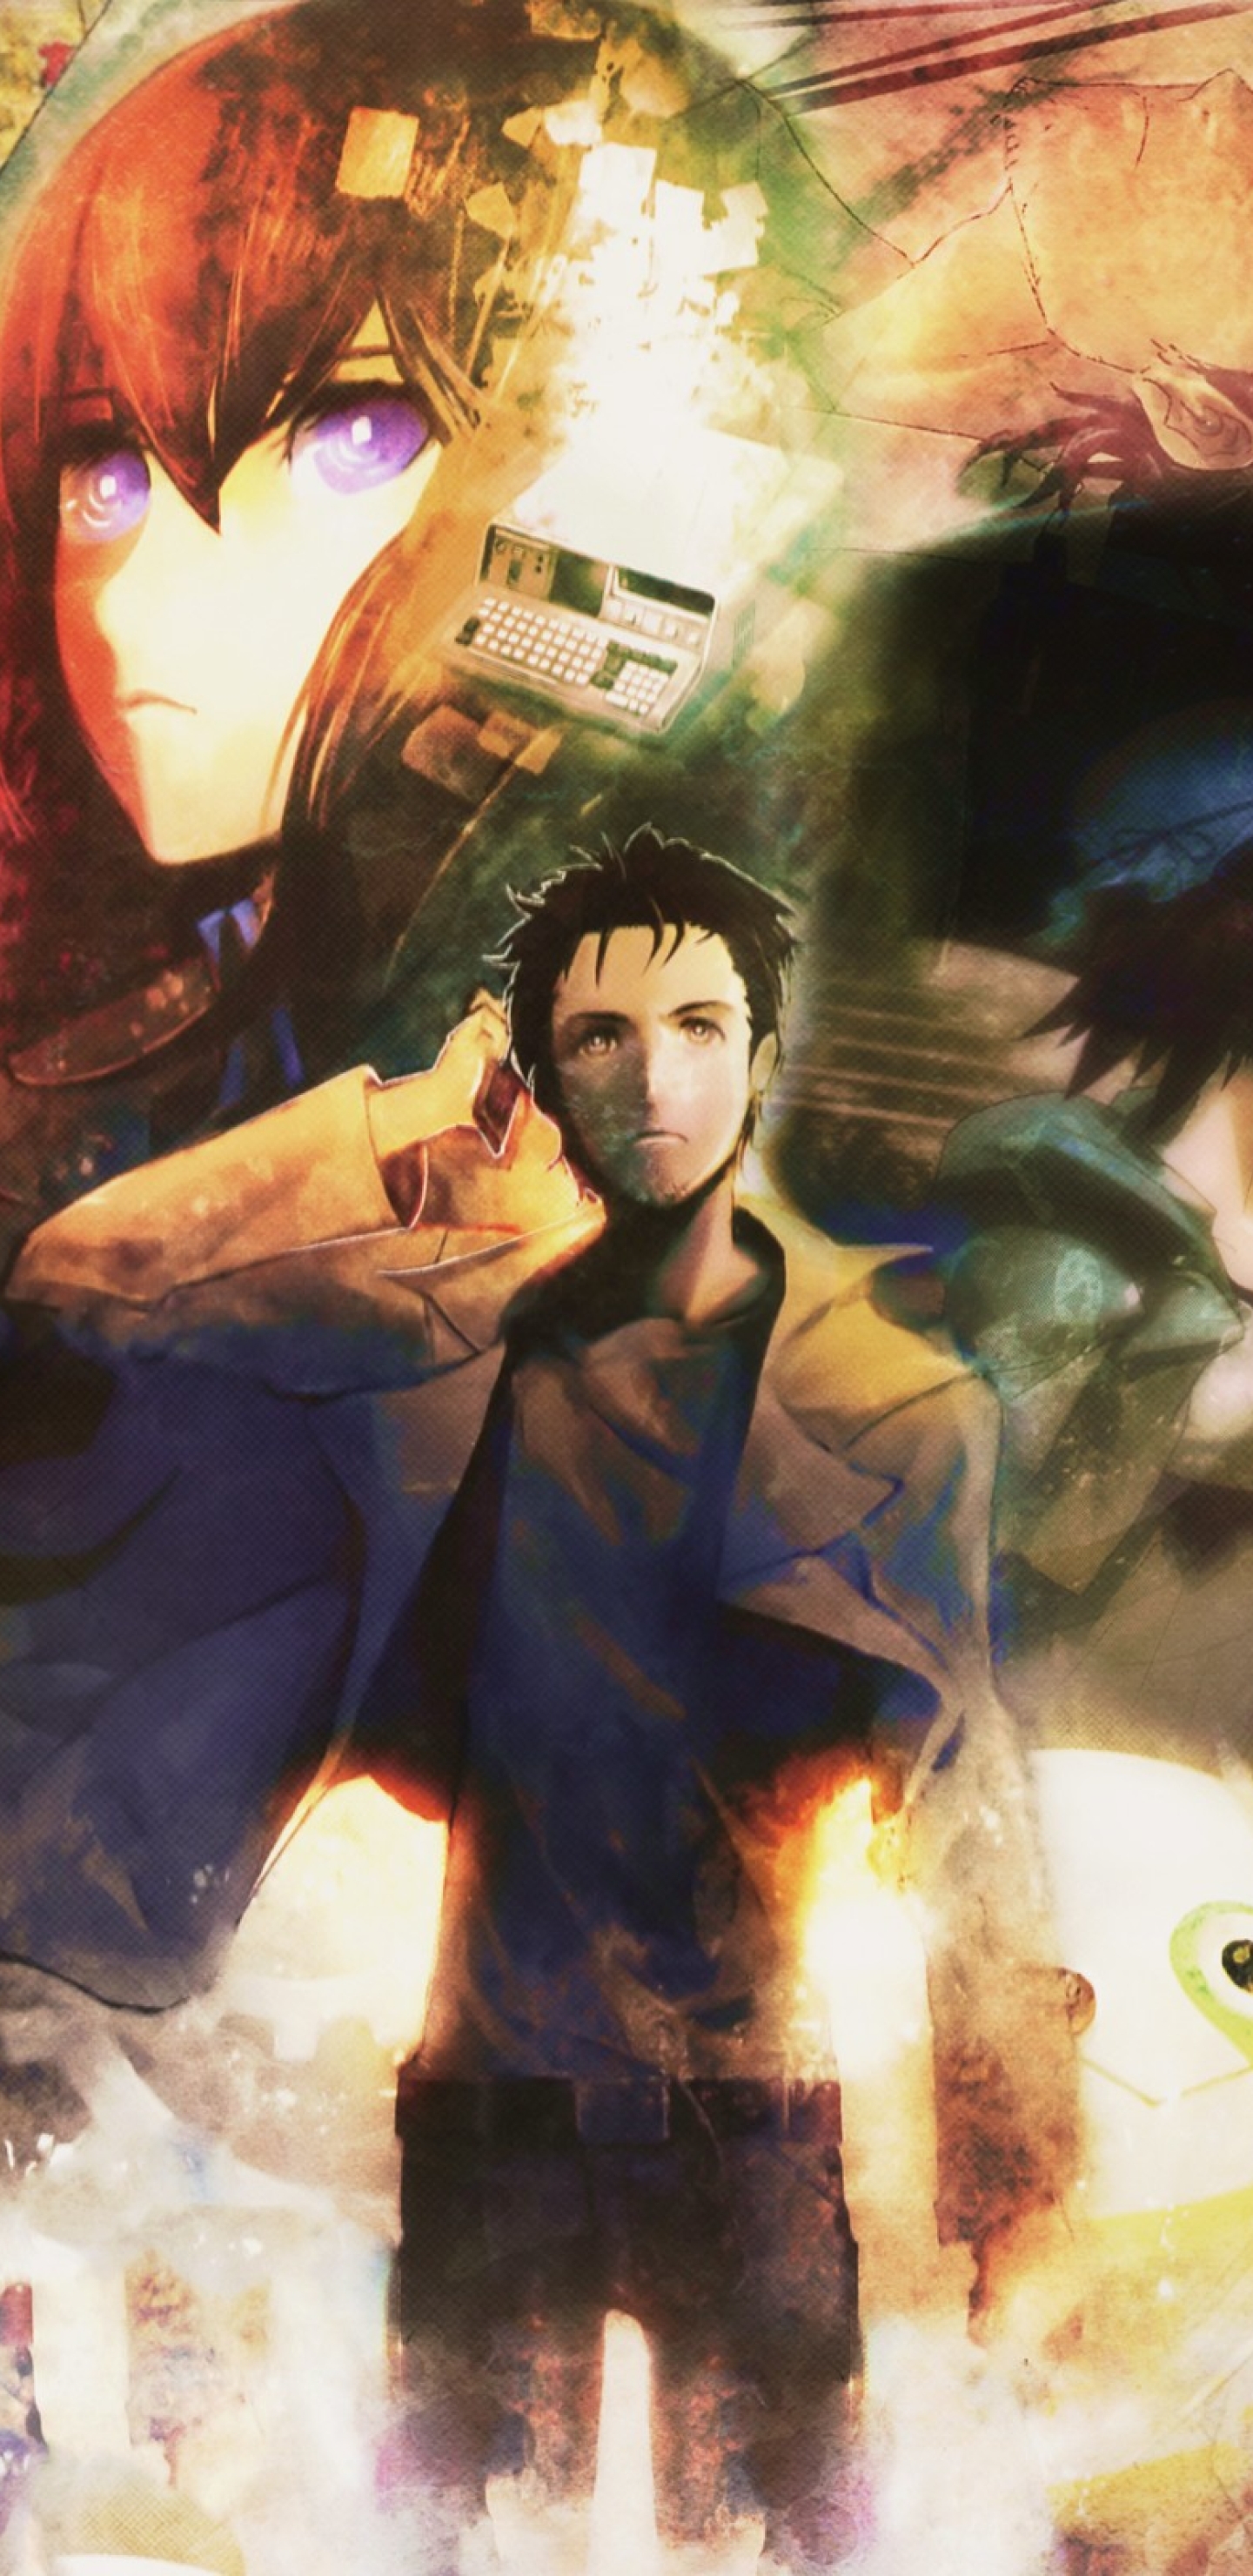 1440x2960 Steins Gate 0 Rintarou Okabe Kurisu Makise Samsung Galaxy Note 9 8 S9 S8 S8 Qhd Wallpaper Hd Games 4k Wallpapers Images Photos And Background Wallpapers Den